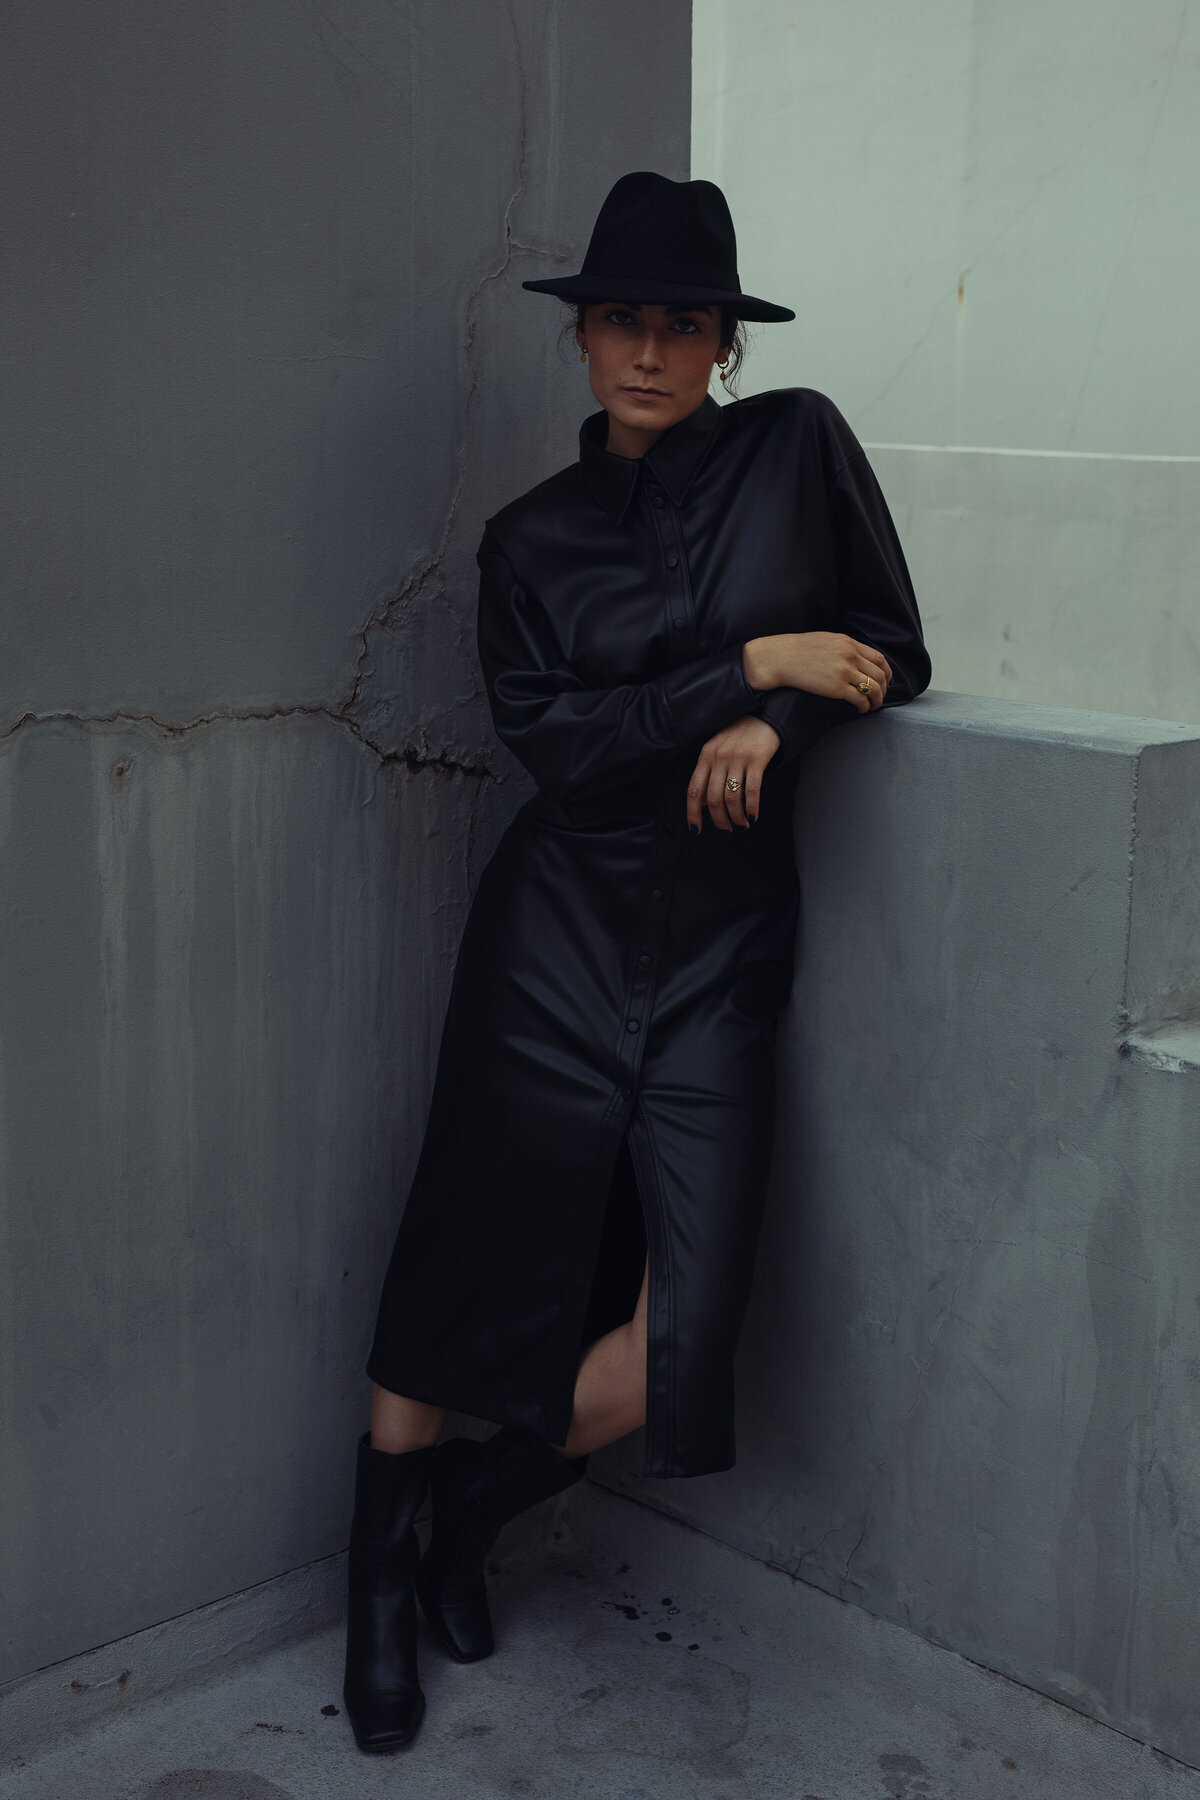 Portrait Photo Of Young Woman In Black Boots And Black Coat Leaning Against a Wall Los Angeles